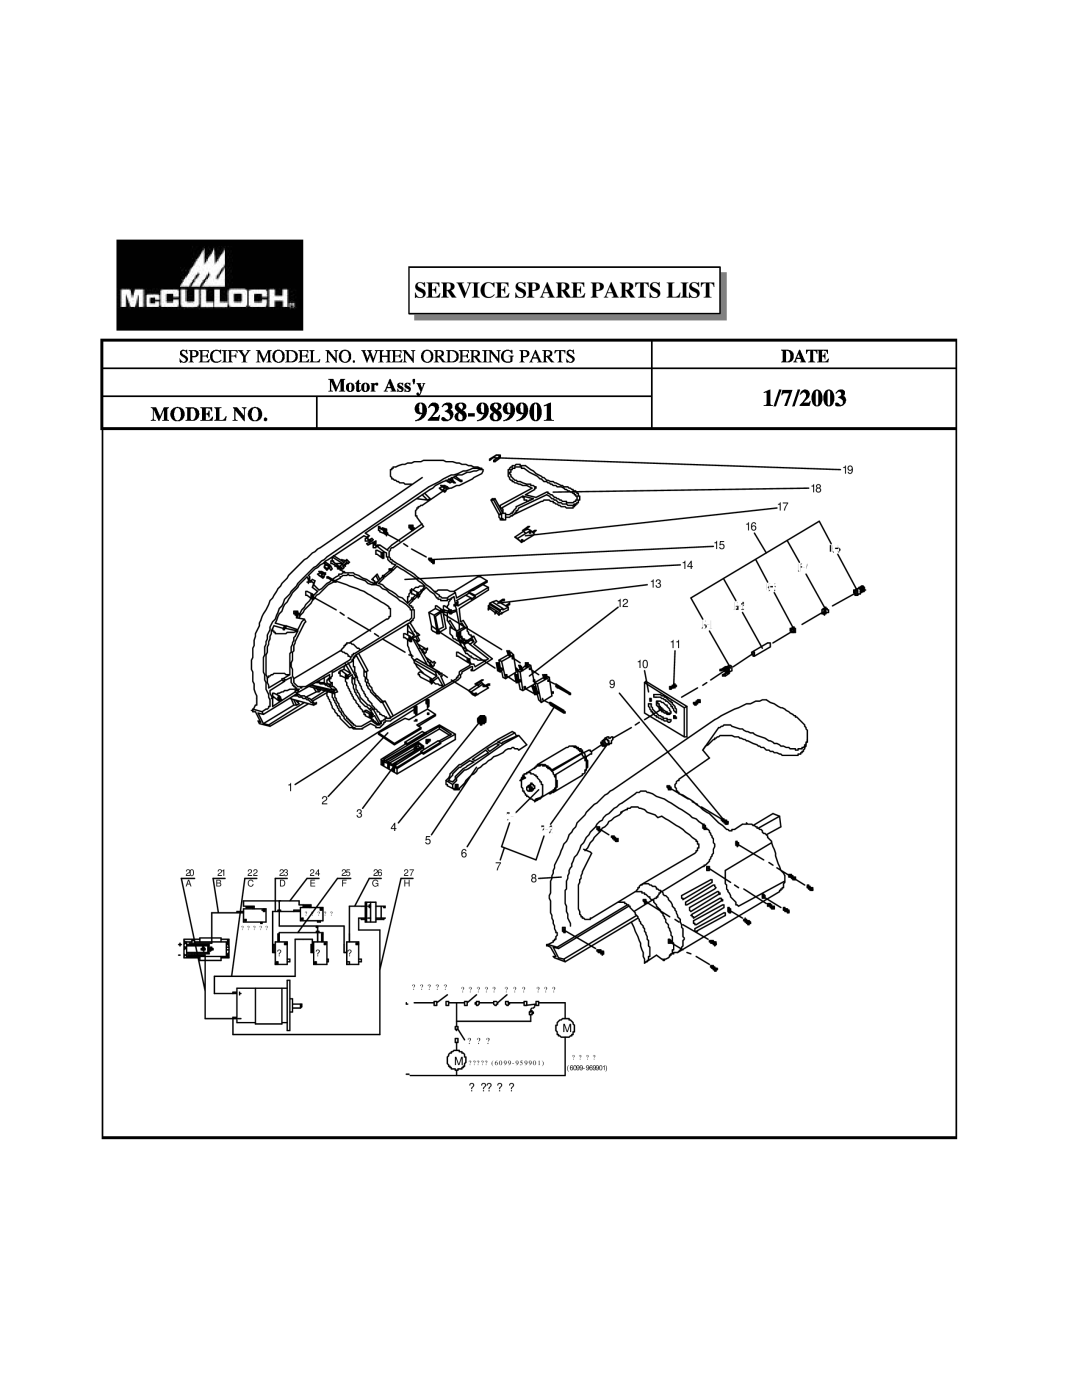 McCulloch 9238-989901 manual 1/7/2003, Service Spare Parts List, Motor Assy, Model No, Date 